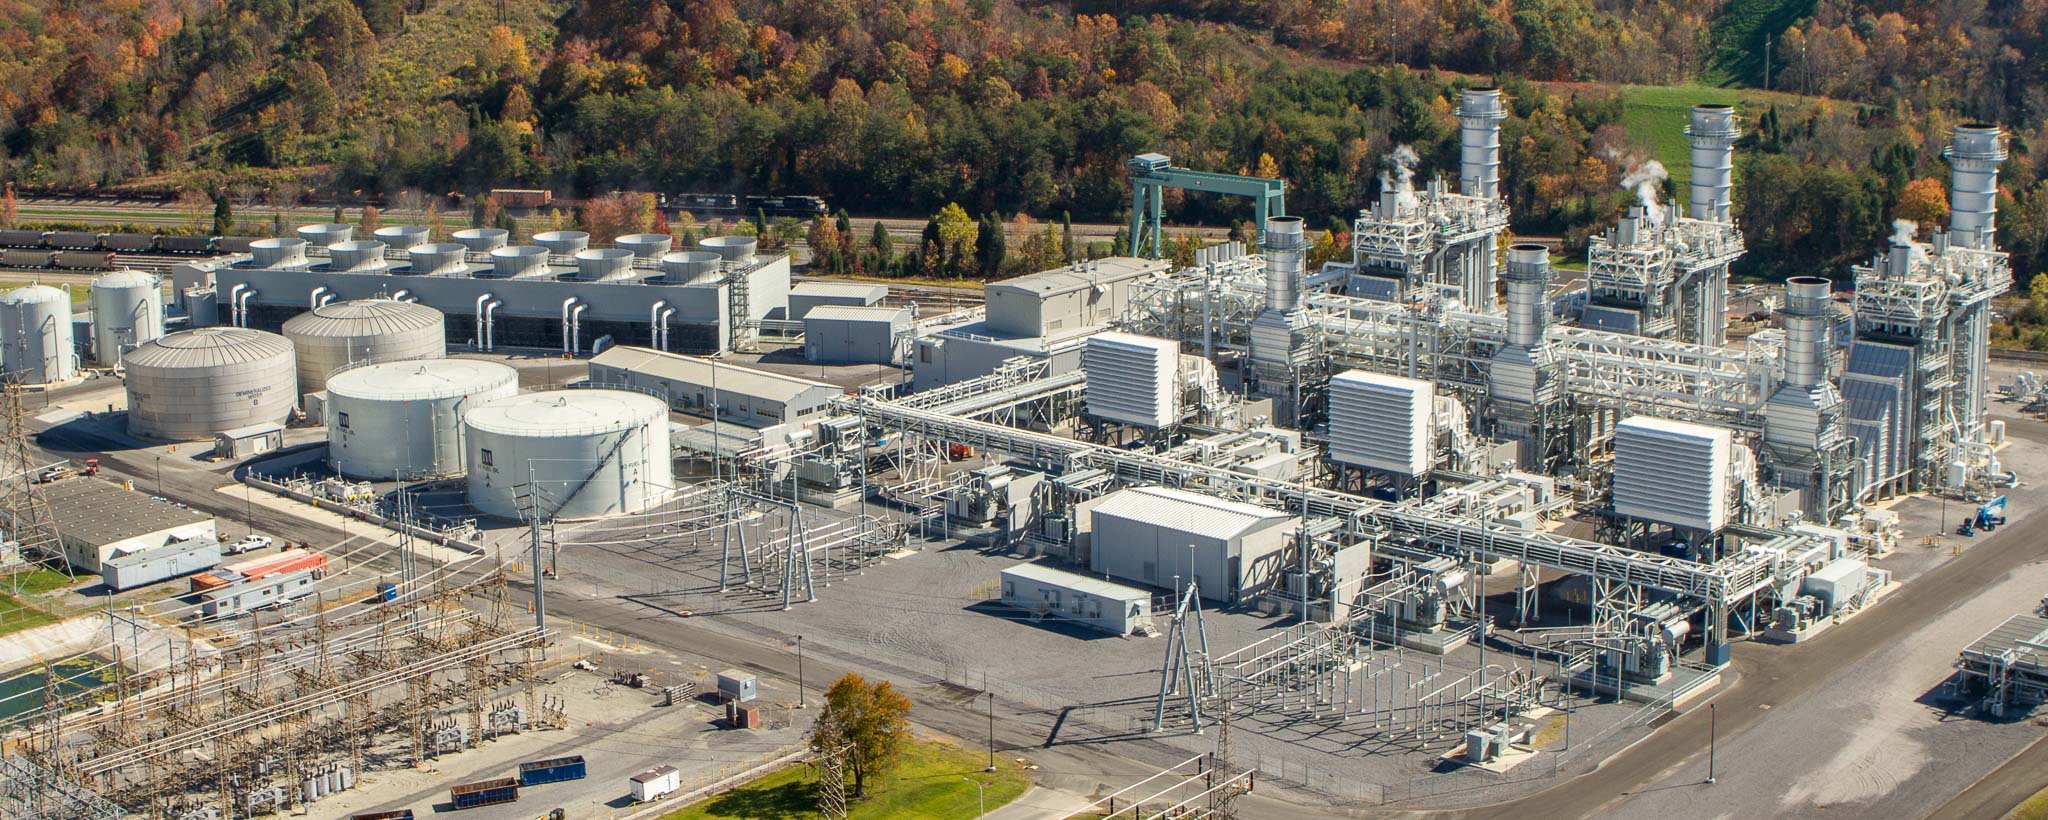 John Sevier Combined Cycle Plant